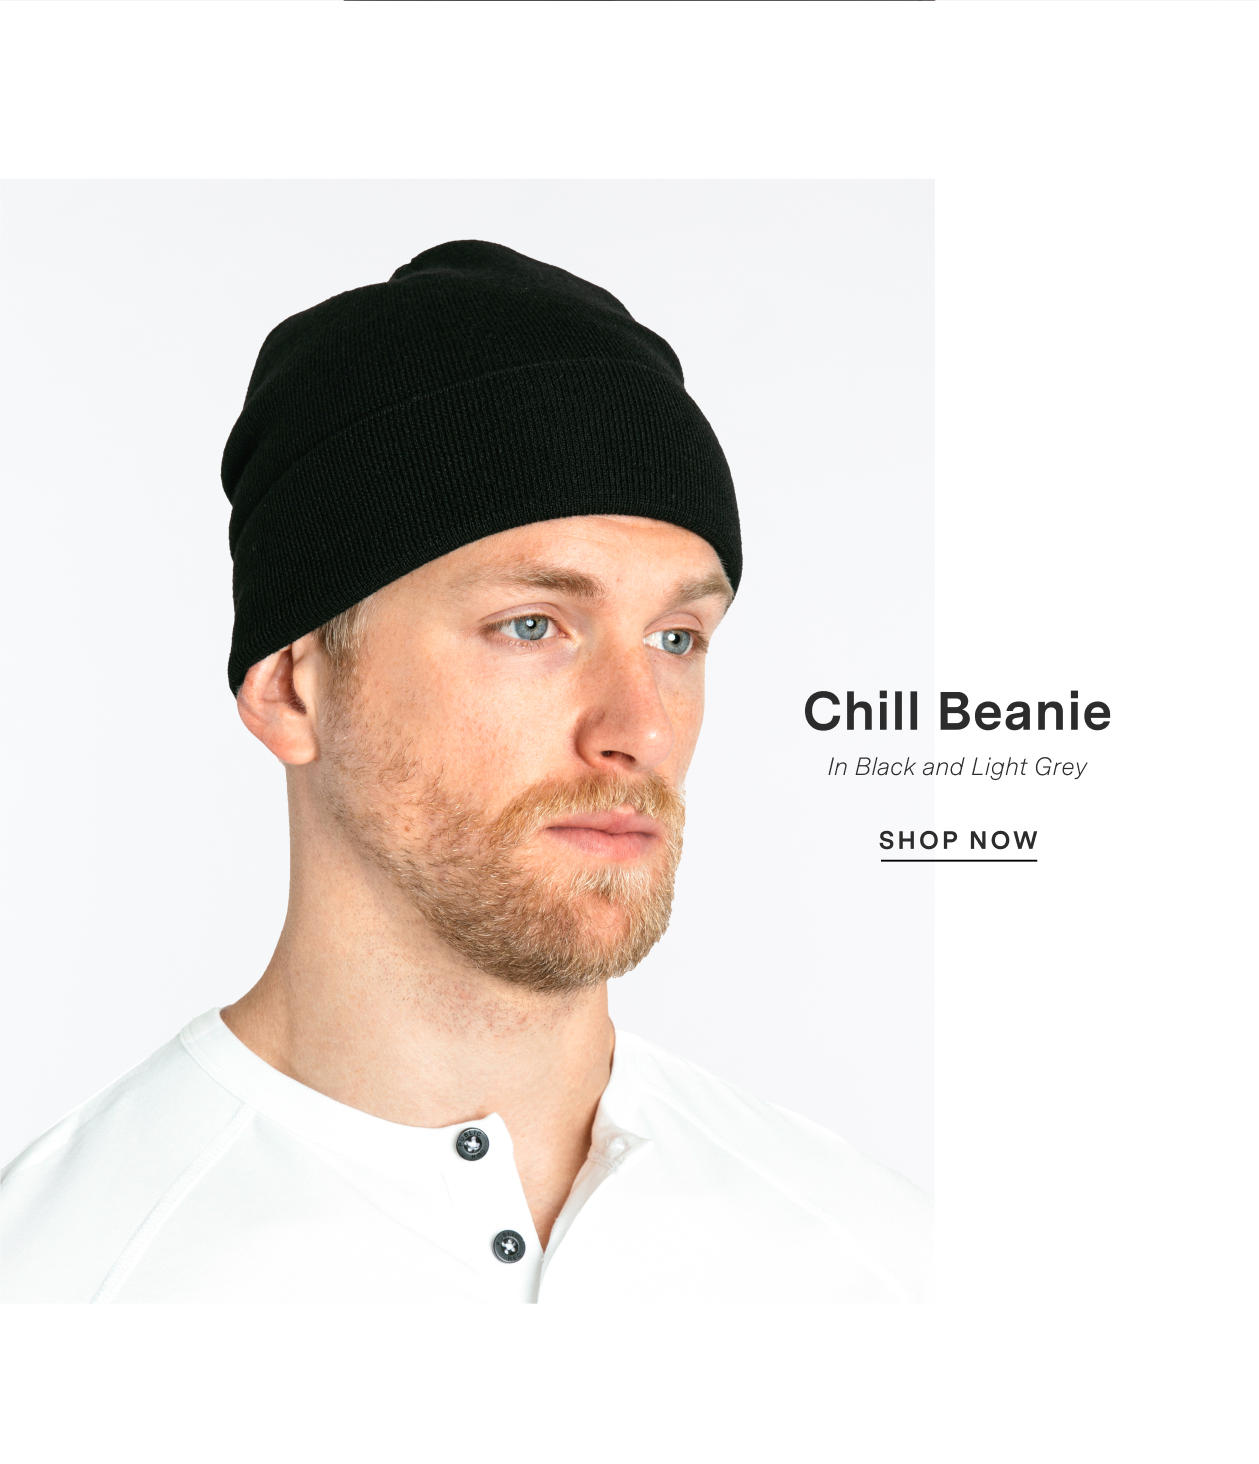 Chill Beanie - Available in Black and Light Grey